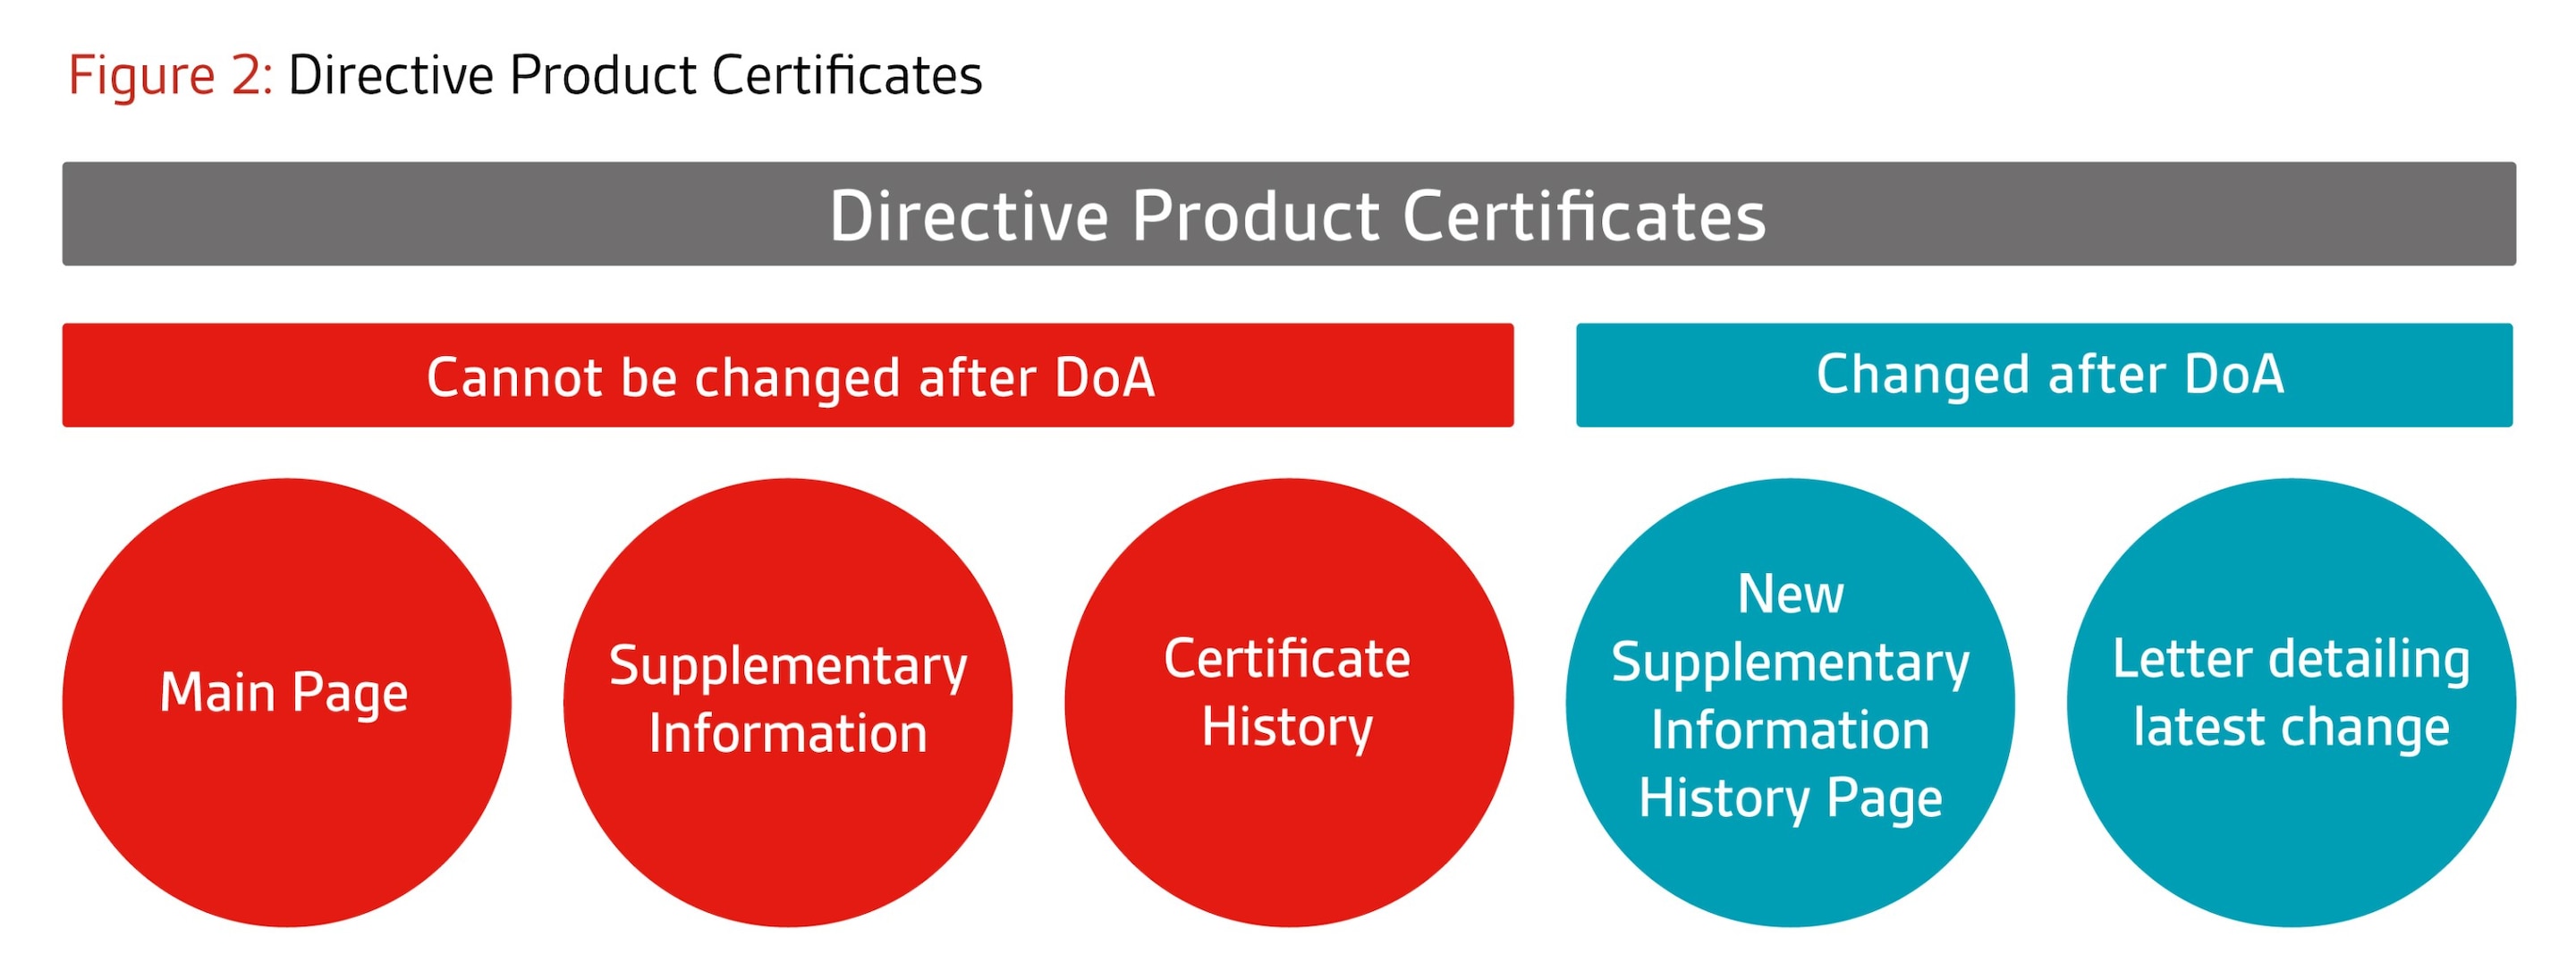 Certificates based on product annexes (e.g. design exam certificates): The main certificate    will remain unchanged. A new supplementary page will be issued to capture the change history. In         addition, a letter will be issued at the end of each project describing the latest change(s) approved as     part of that project.